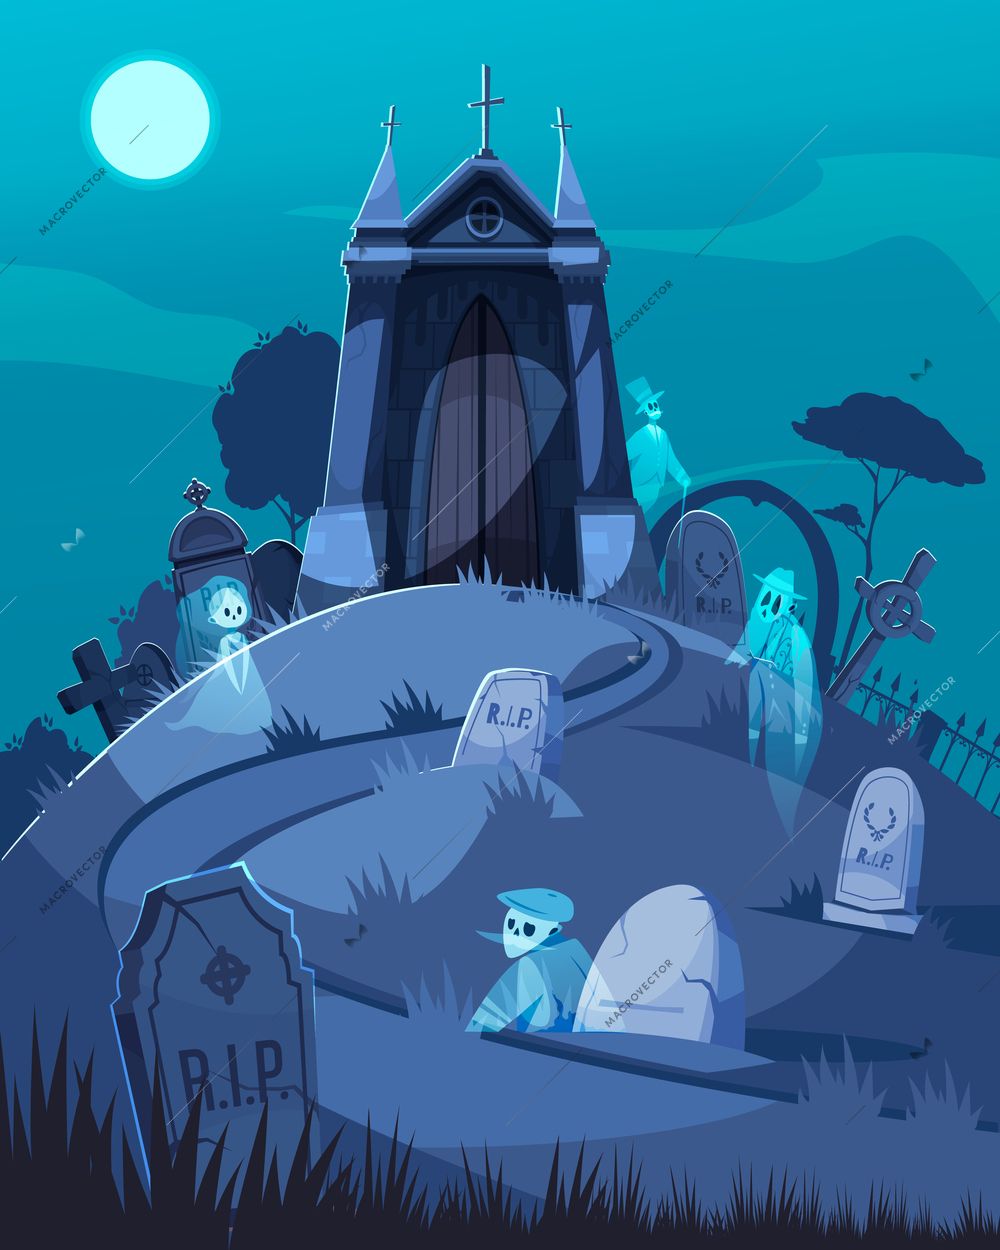 Old cemetery chapel and ghosts walking among tombstones cartoon vector illustration